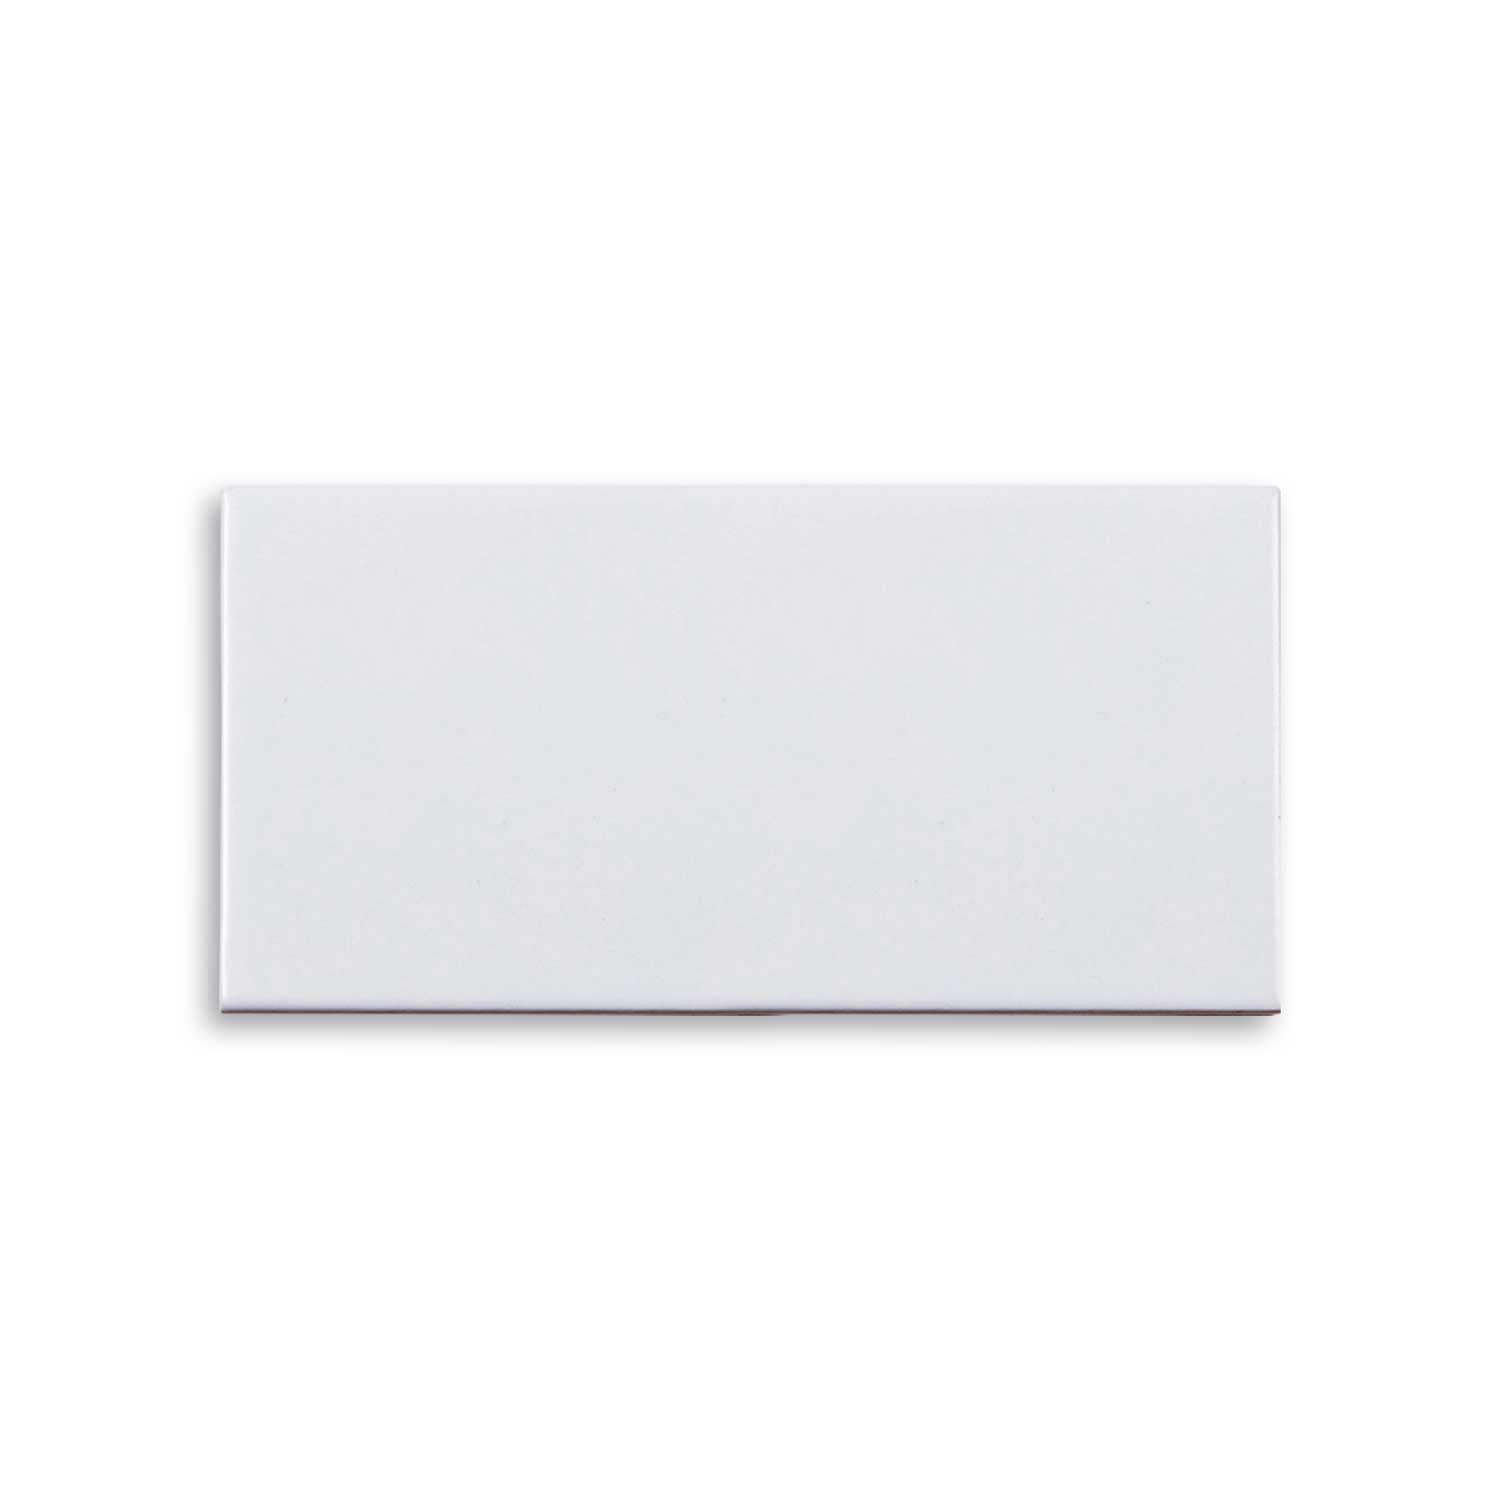 Classic White Ceramic Wall Tile Rectangle 100x200mm